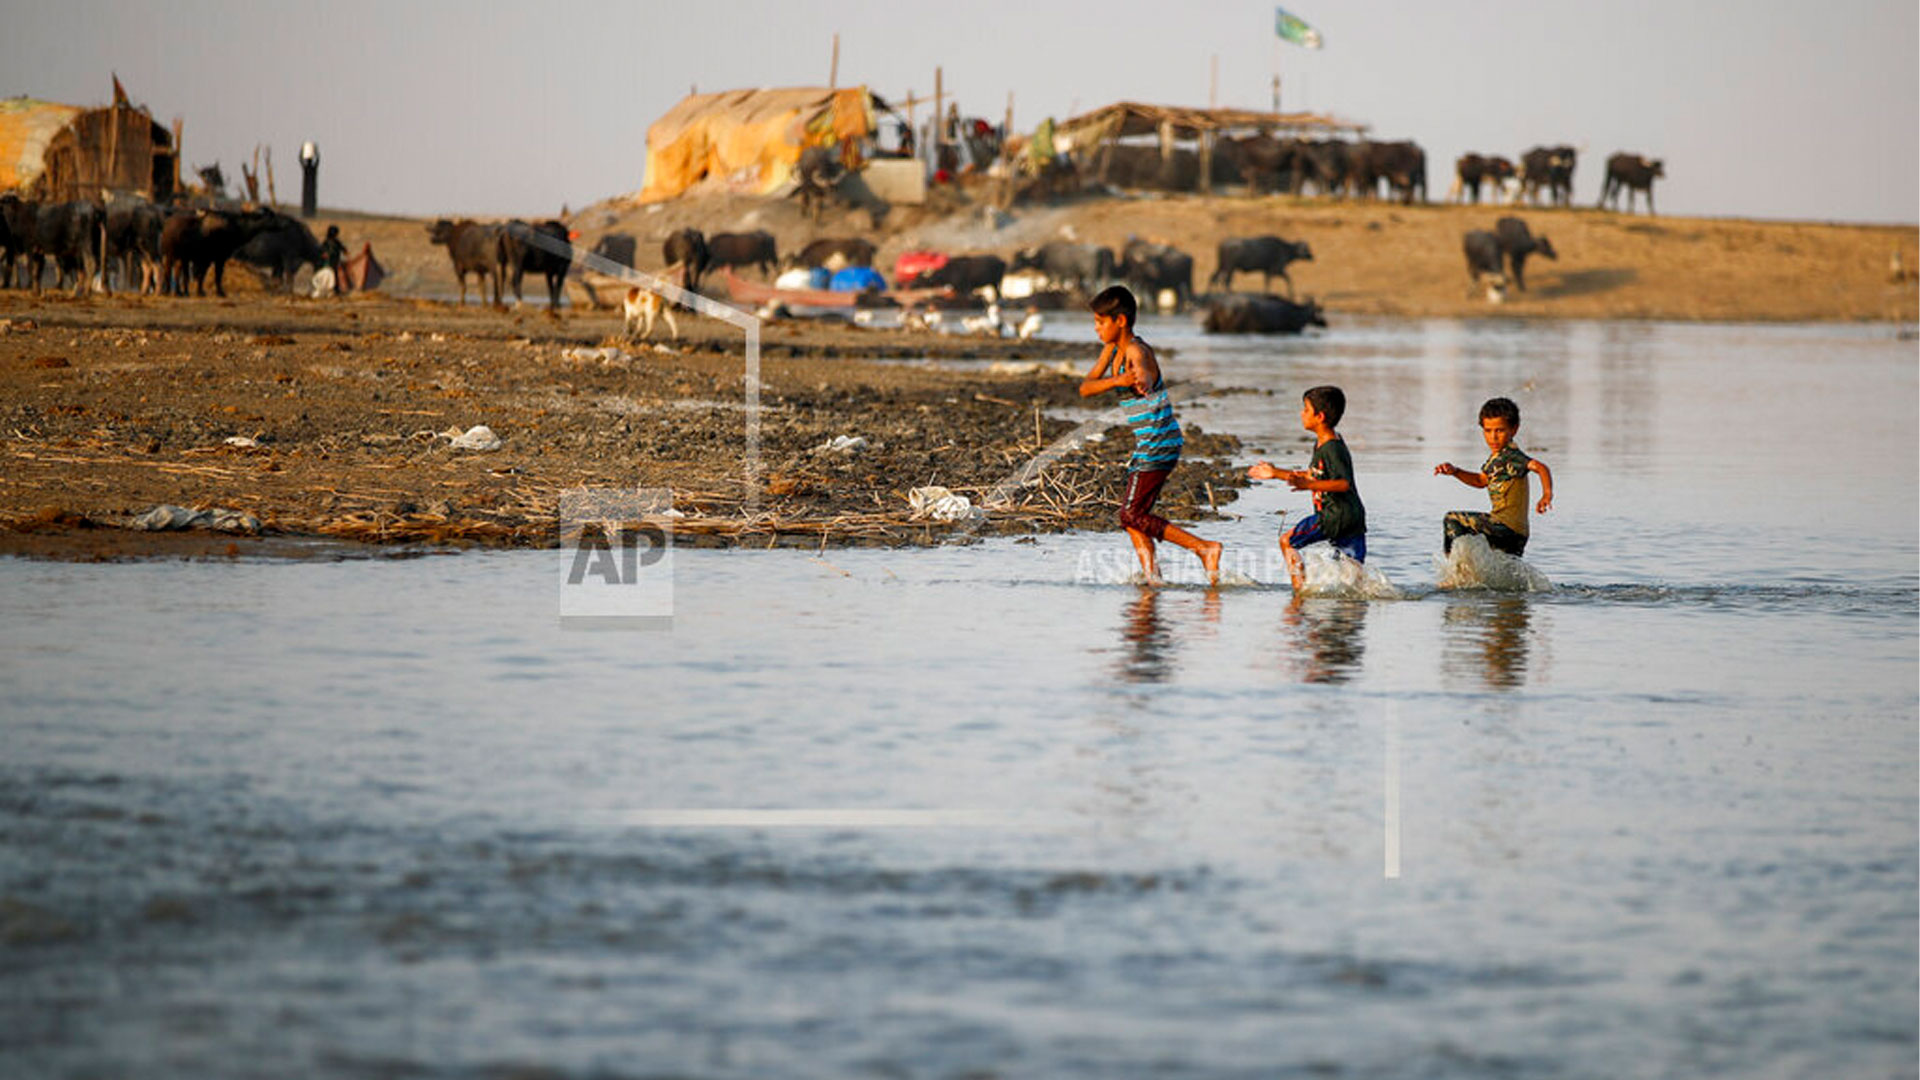 Boys play in the water of the Chibayish marshes in southern Iraq which has suffered from high salinity levels as a result of back to back drought and declining water levels, in Dhi Qar province, Iraq, Friday Sept. 2, 2022. (AP Photo/Anmar K